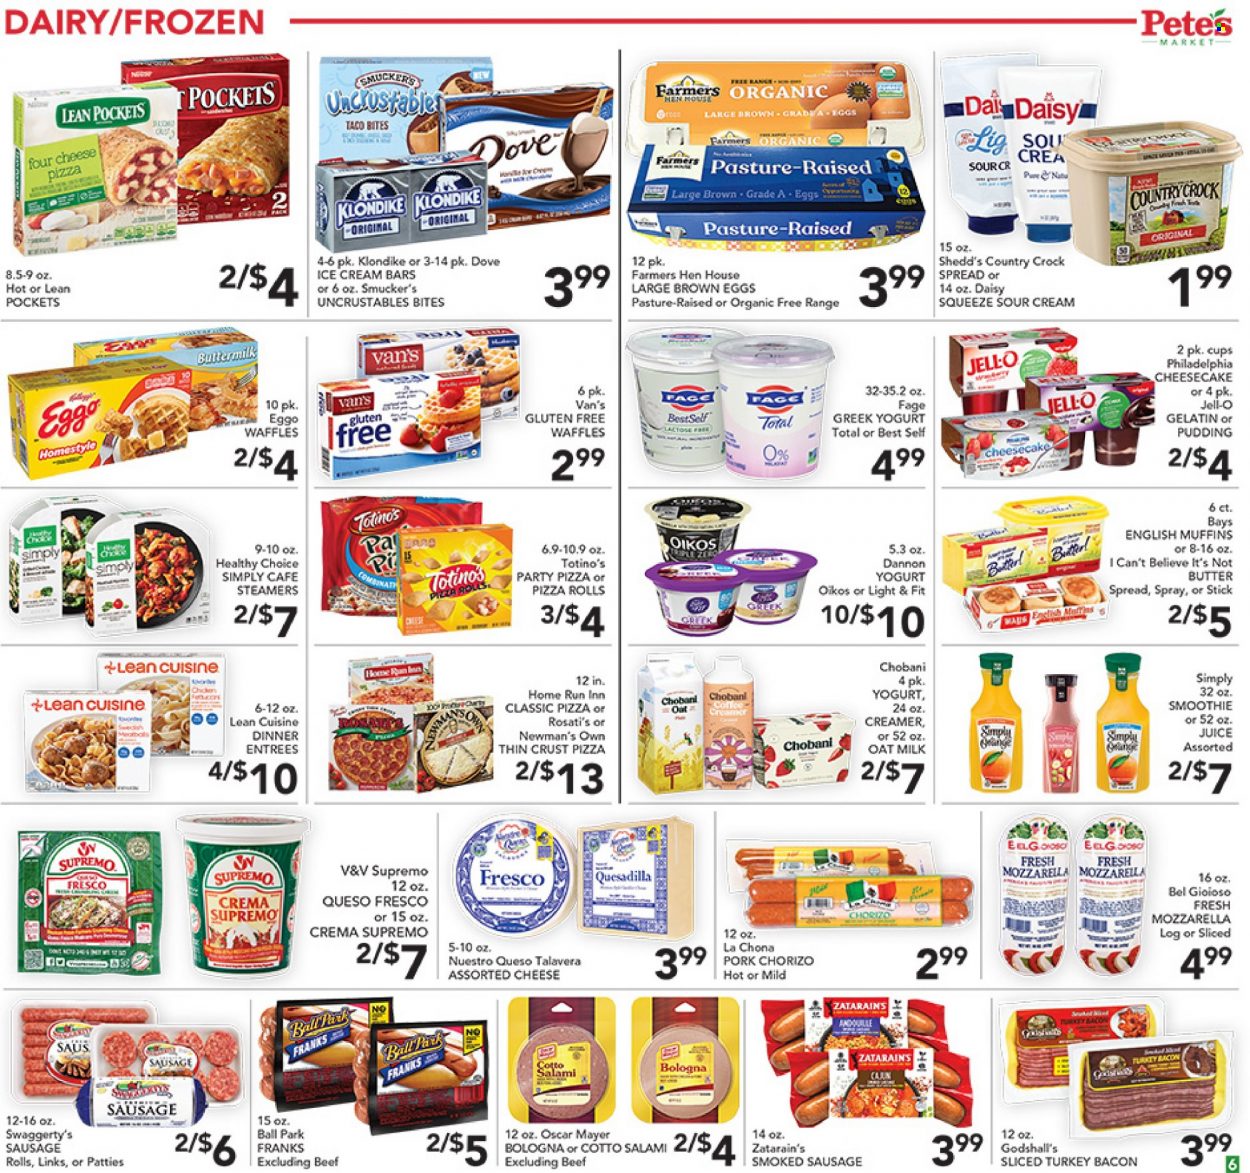 thumbnail - Pete's Fresh Market Flyer - 01/12/2022 - 01/18/2022 - Sales products - english muffins, sausage rolls, pizza rolls, waffles, pizza, Lean Cuisine, Healthy Choice, bacon, salami, sliced turkey, turkey bacon, chorizo, Oscar Mayer, sausage, smoked sausage, Philadelphia, queso fresco, greek yoghurt, pudding, yoghurt, Oikos, Chobani, Dannon, buttermilk, oat milk, eggs, I Can't Believe It's Not Butter, sour cream, creamer, ice cream, ice cream bars, Jell-O, juice, smoothie, coffee. Page 6.